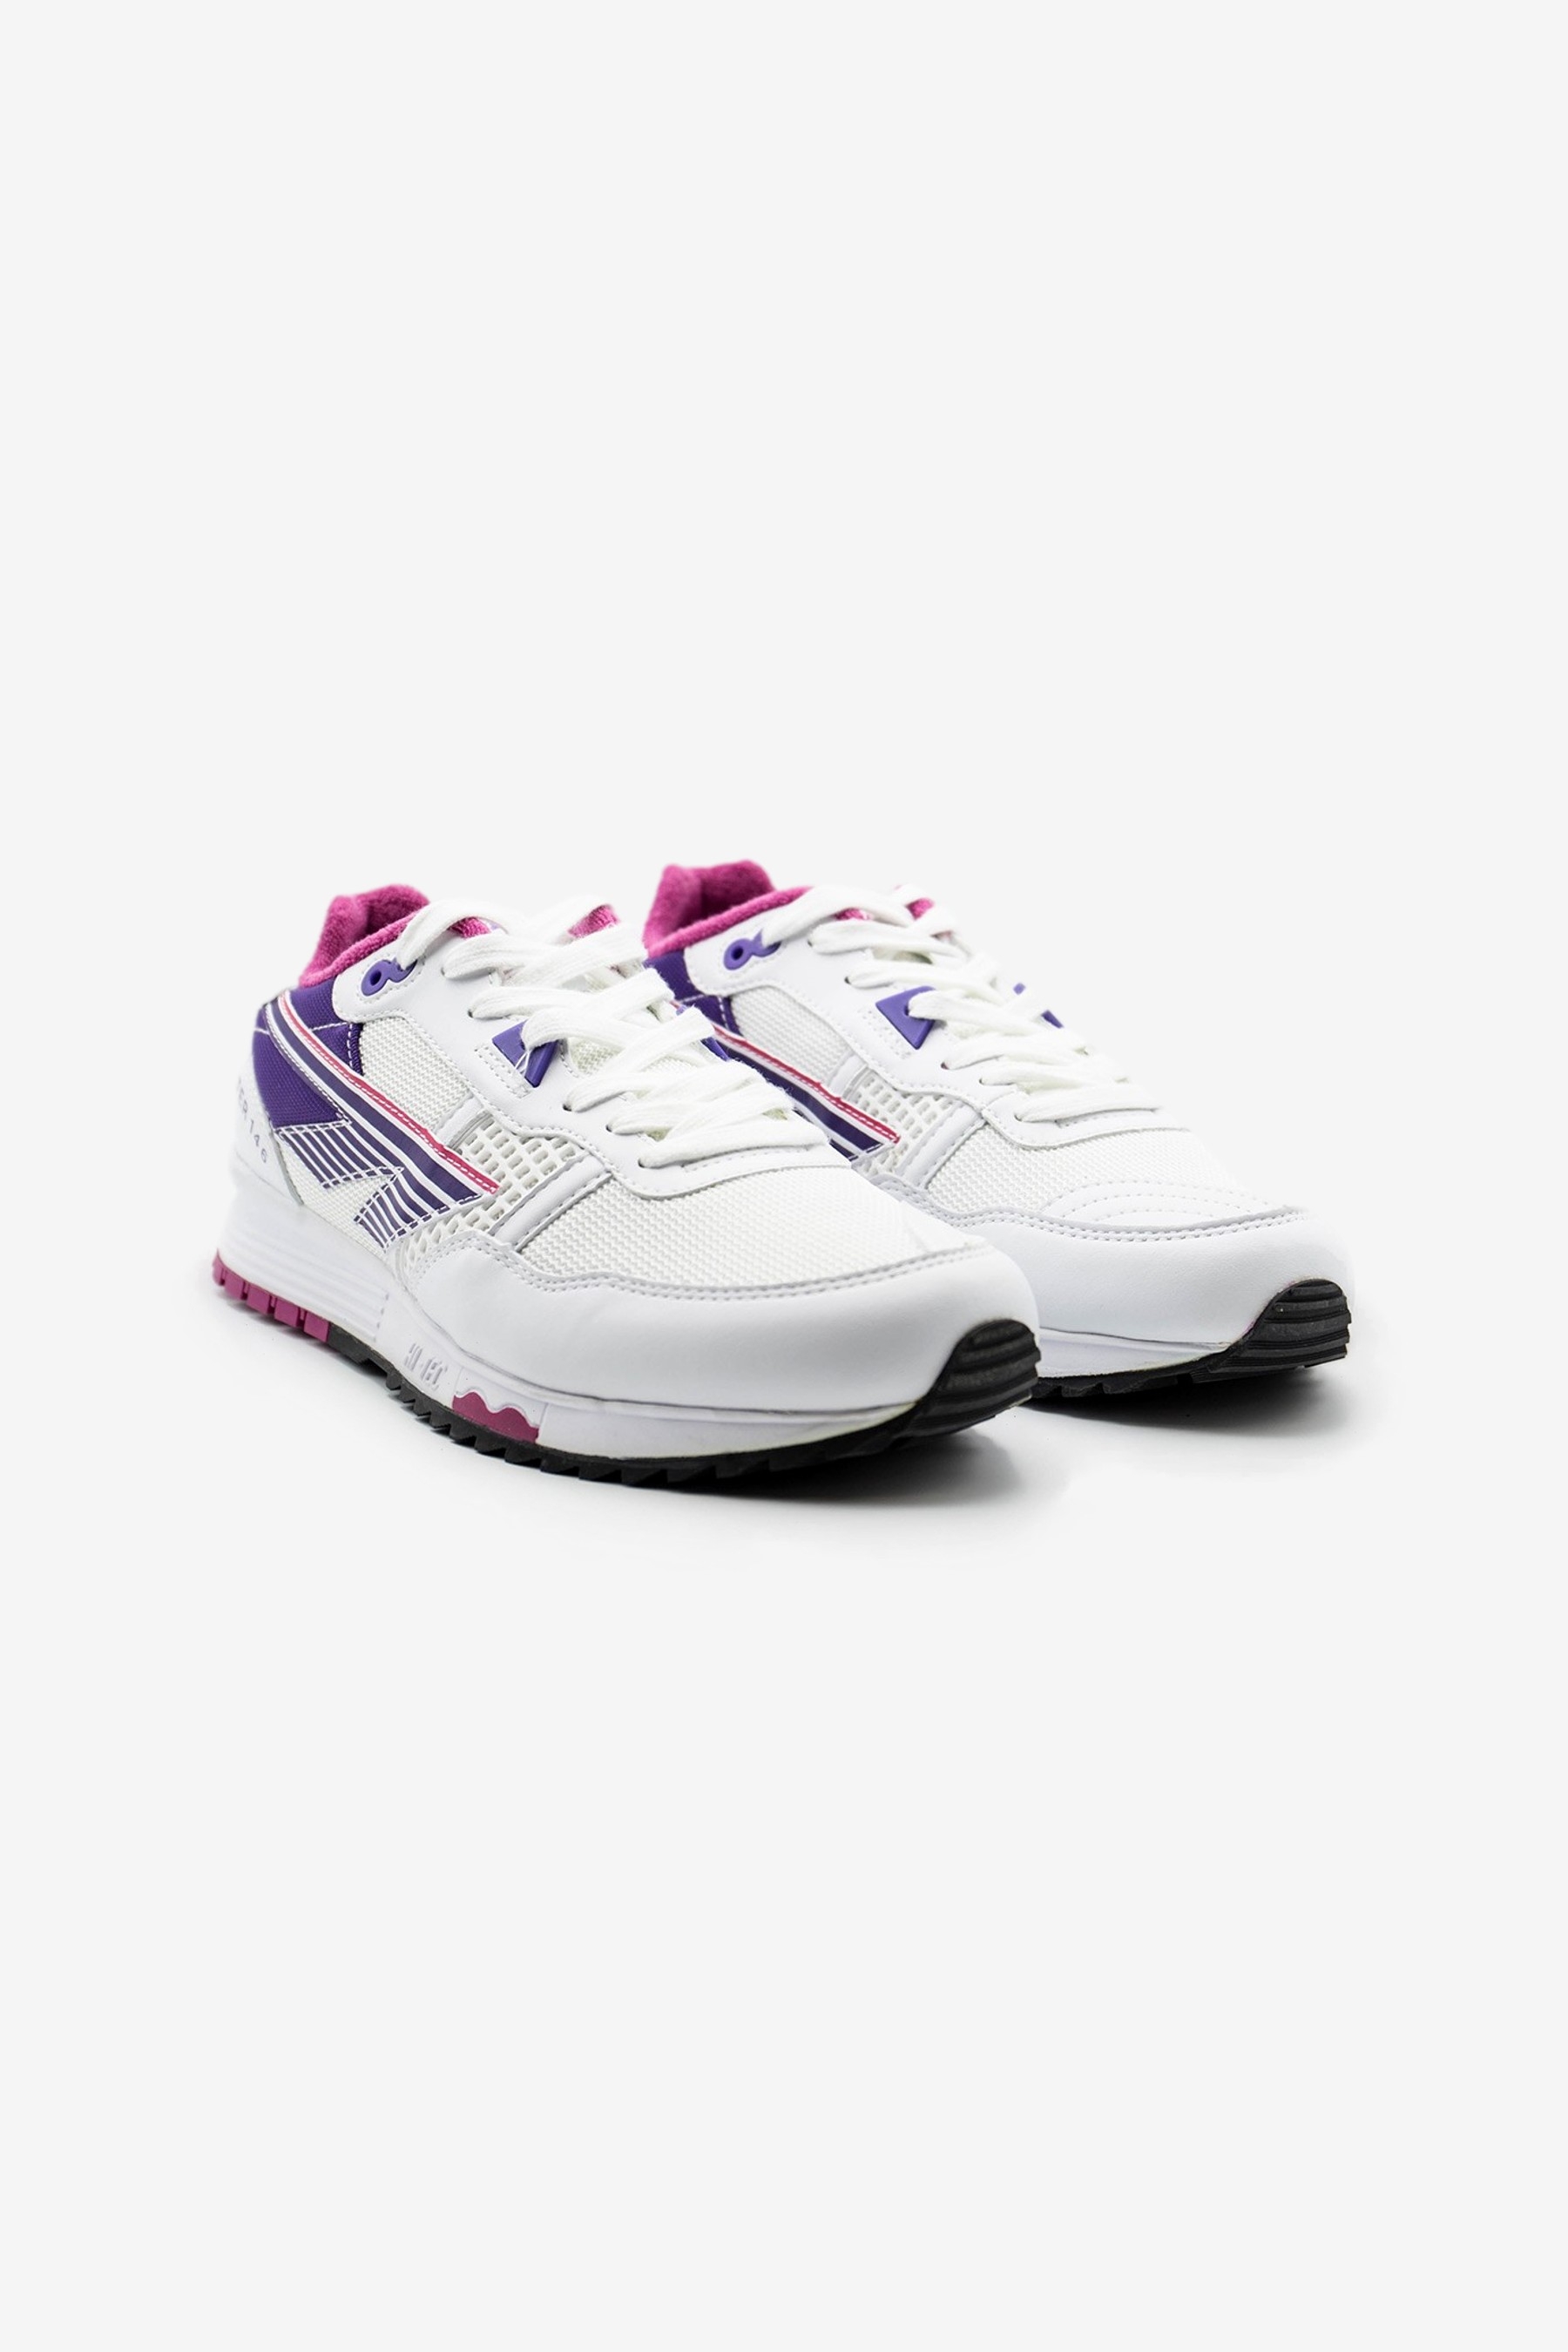 HTS Badwater 146 ABC Sneakers in White / Purple / Beetroot - Hi